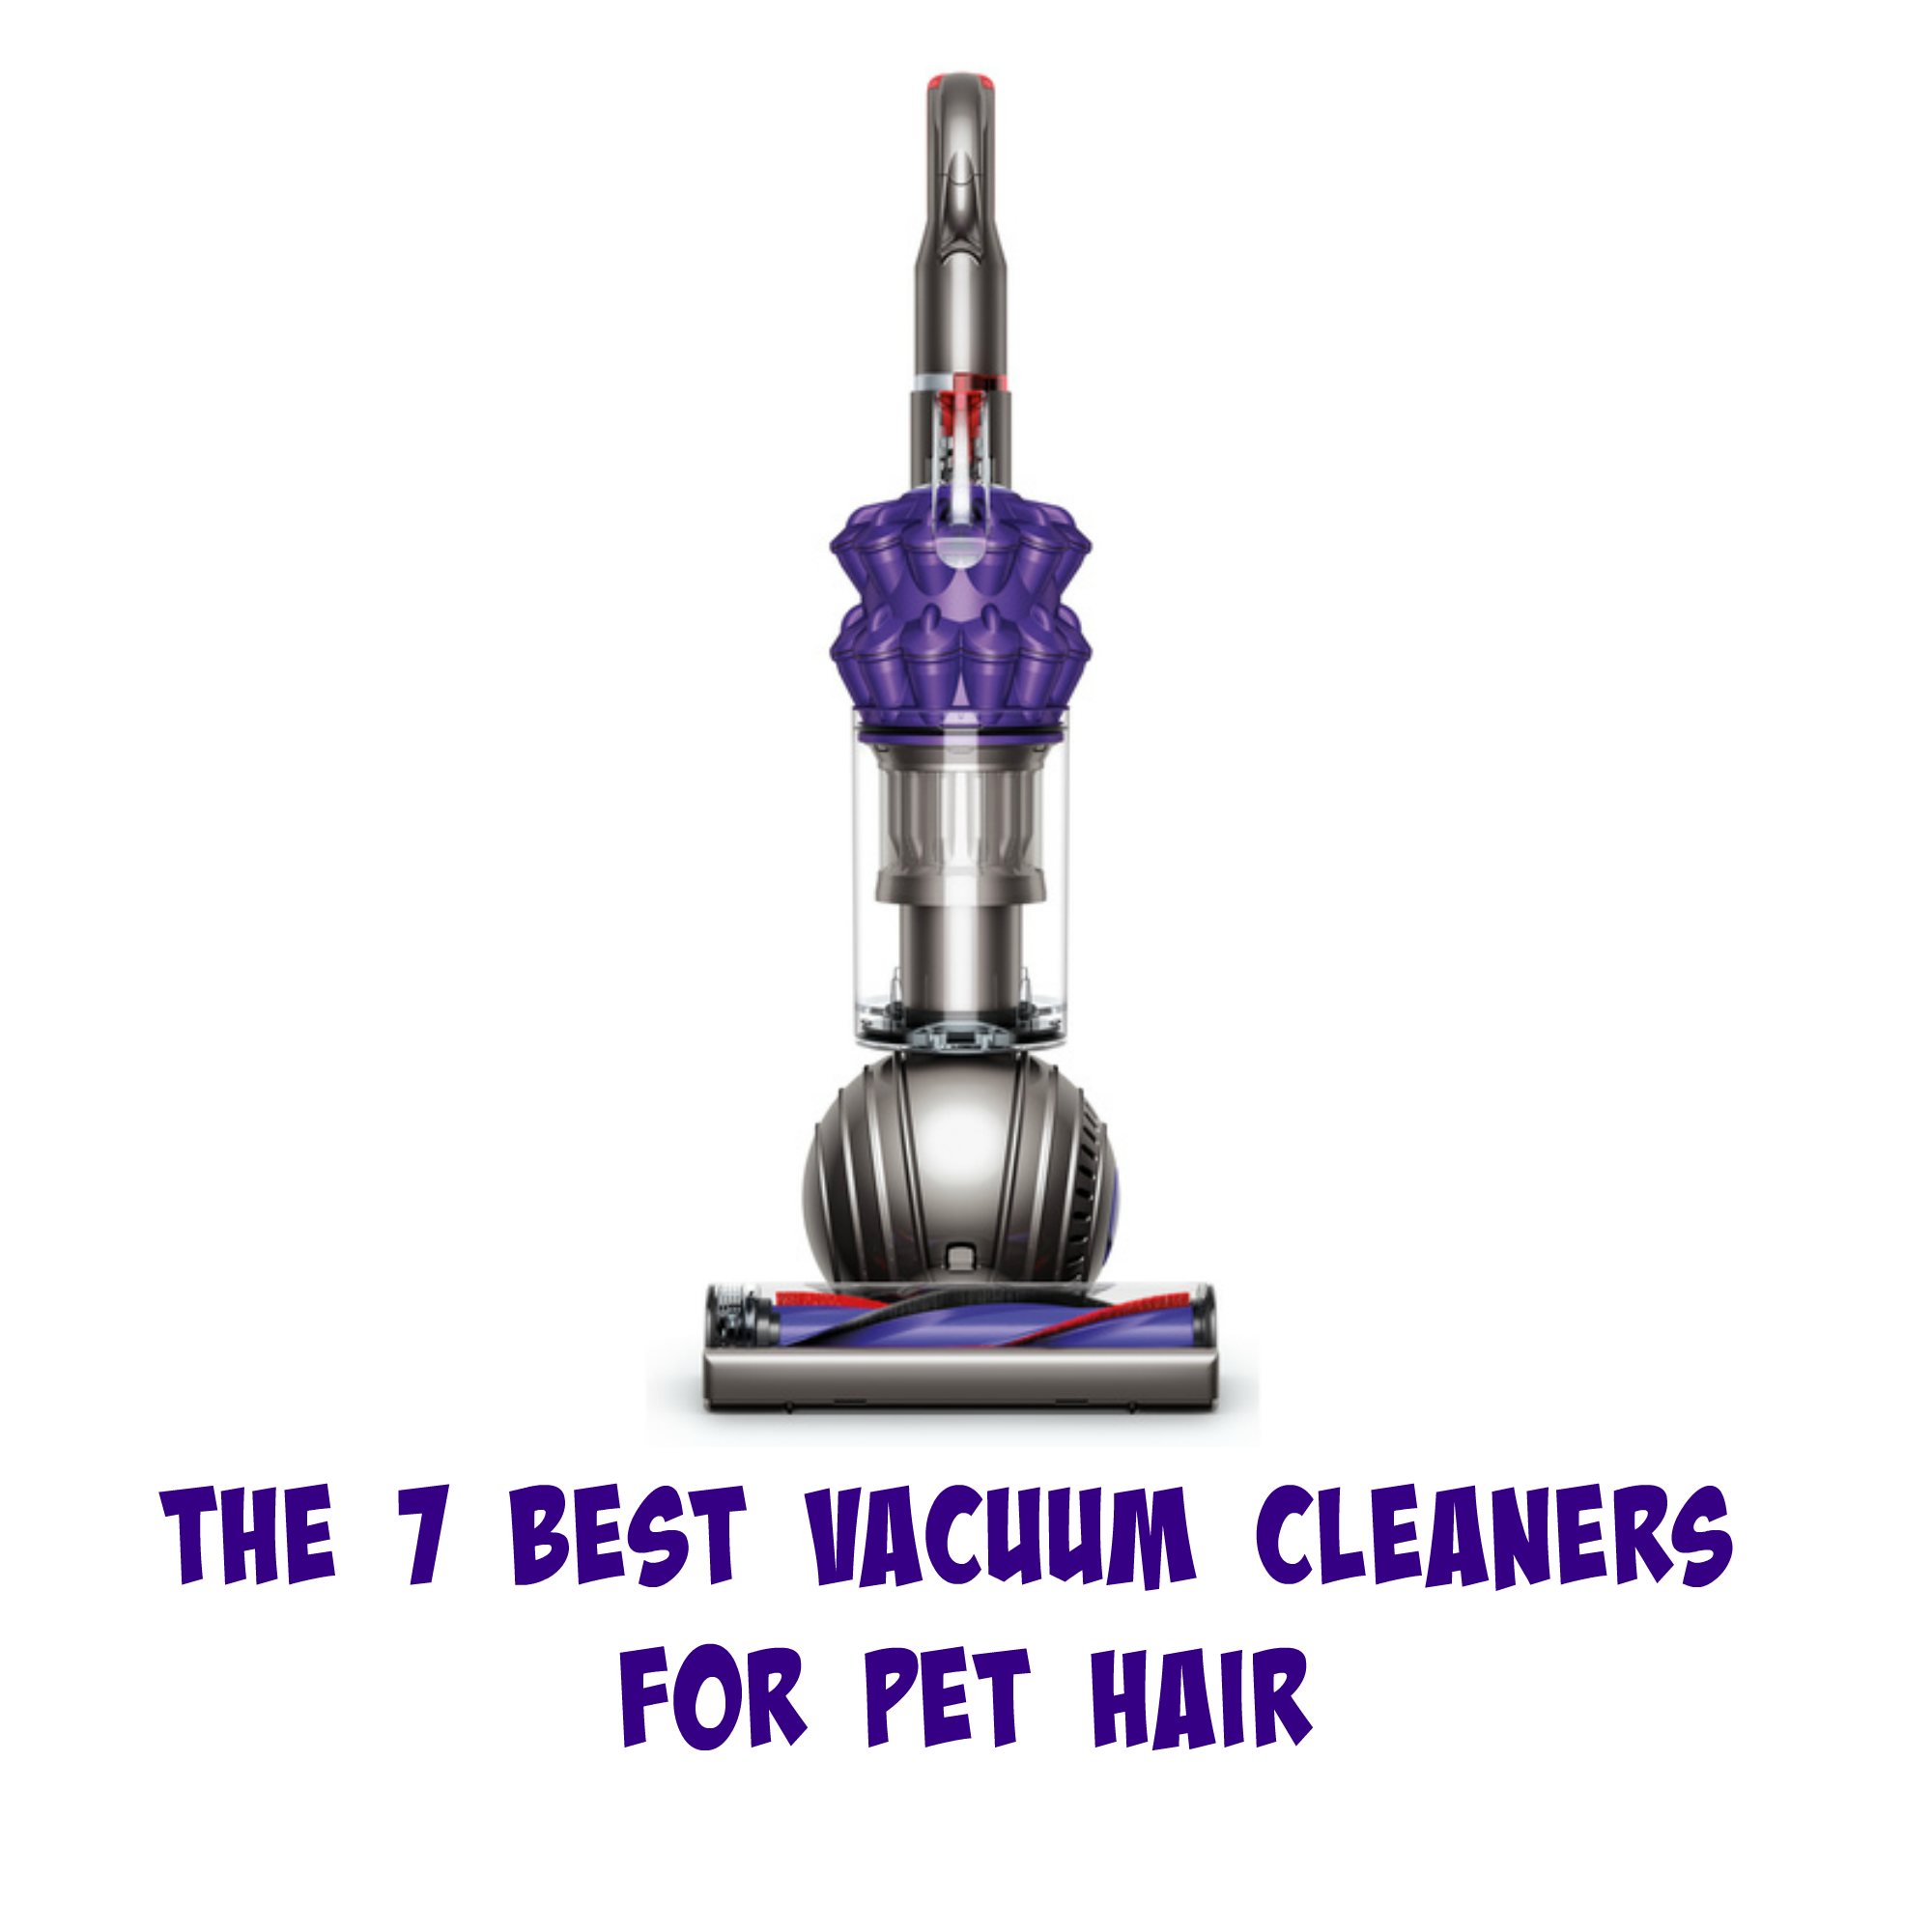 The 7 Best Vacuum Cleaners For Pet Hair